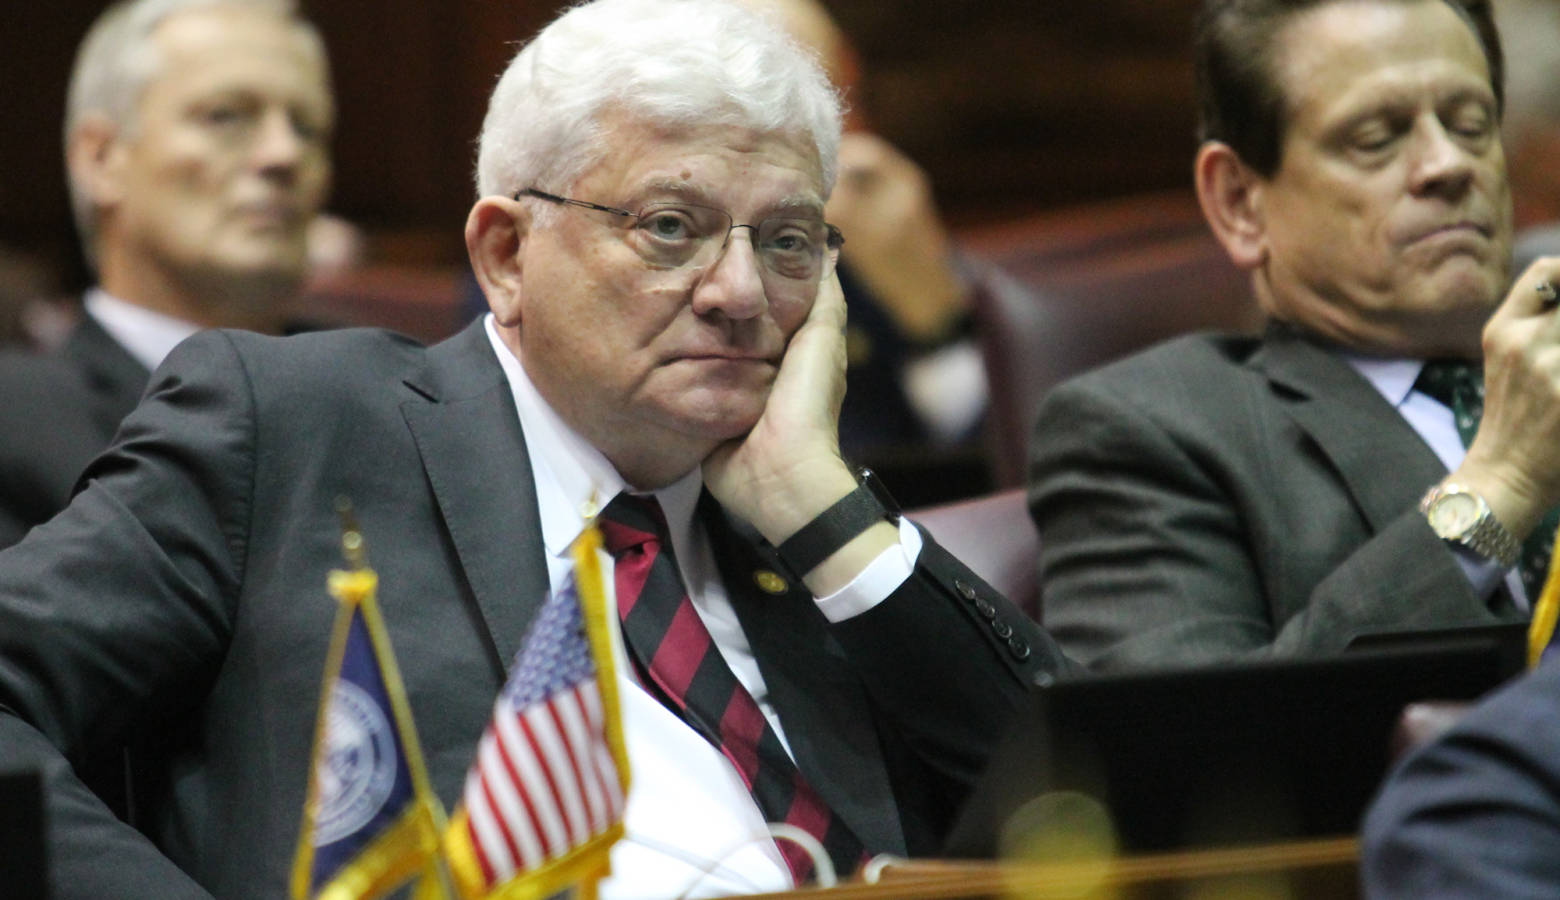 Rep. Ed Soliday (R-Valparaiso) wants a two-year moratorium on new power plants while the legislature and utility regulators help craft a comprehensive energy plan for the state. (Lauren Chapman/IPB News)